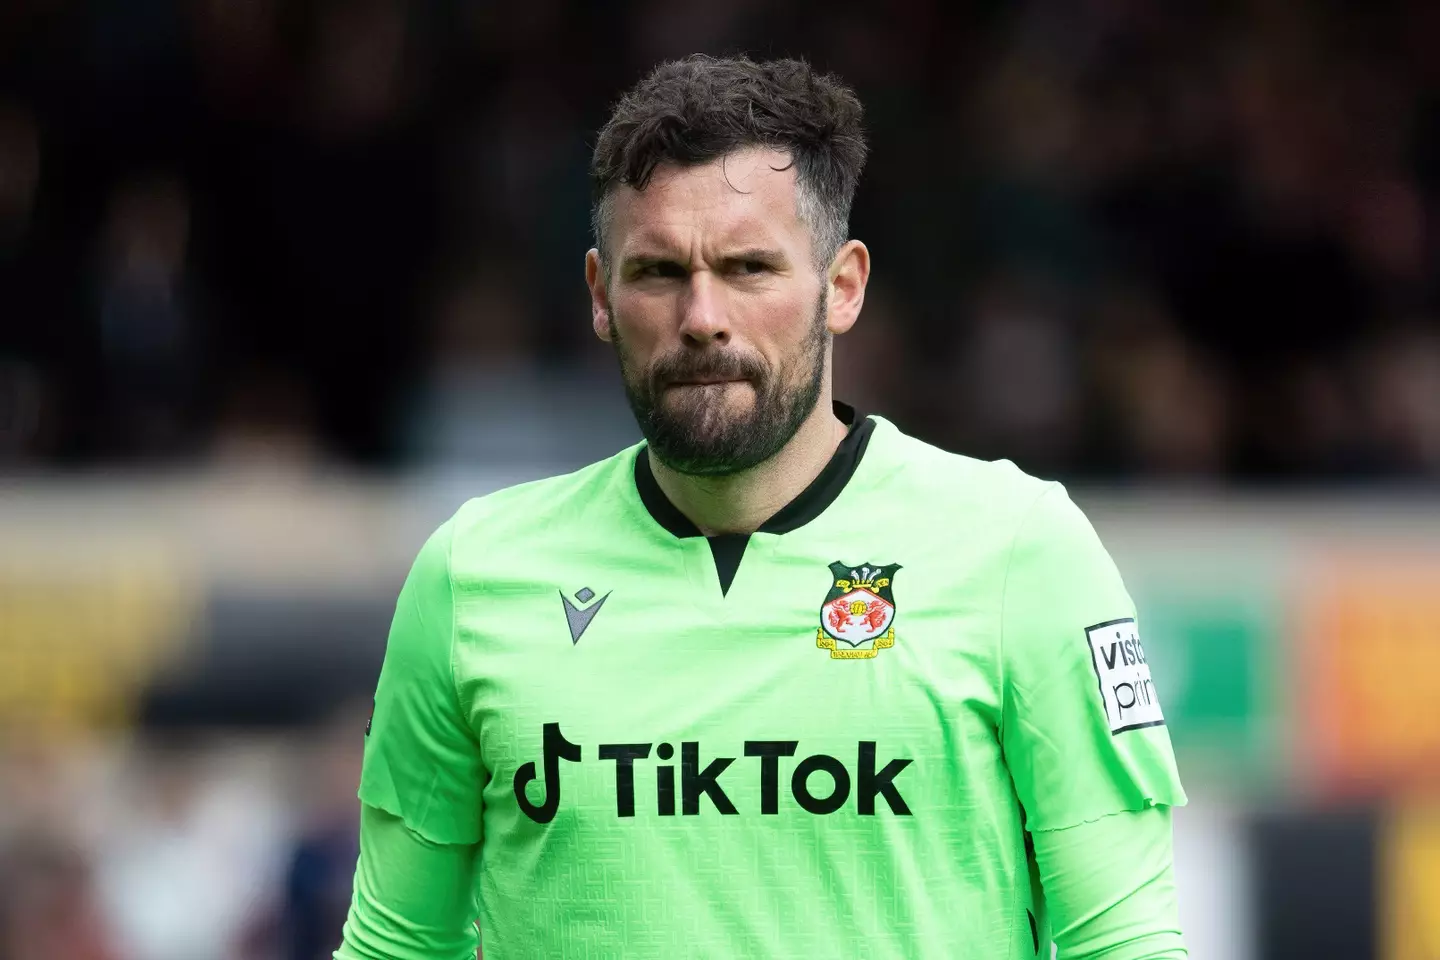 Ben Foster may get to star in the highly anticipated film.